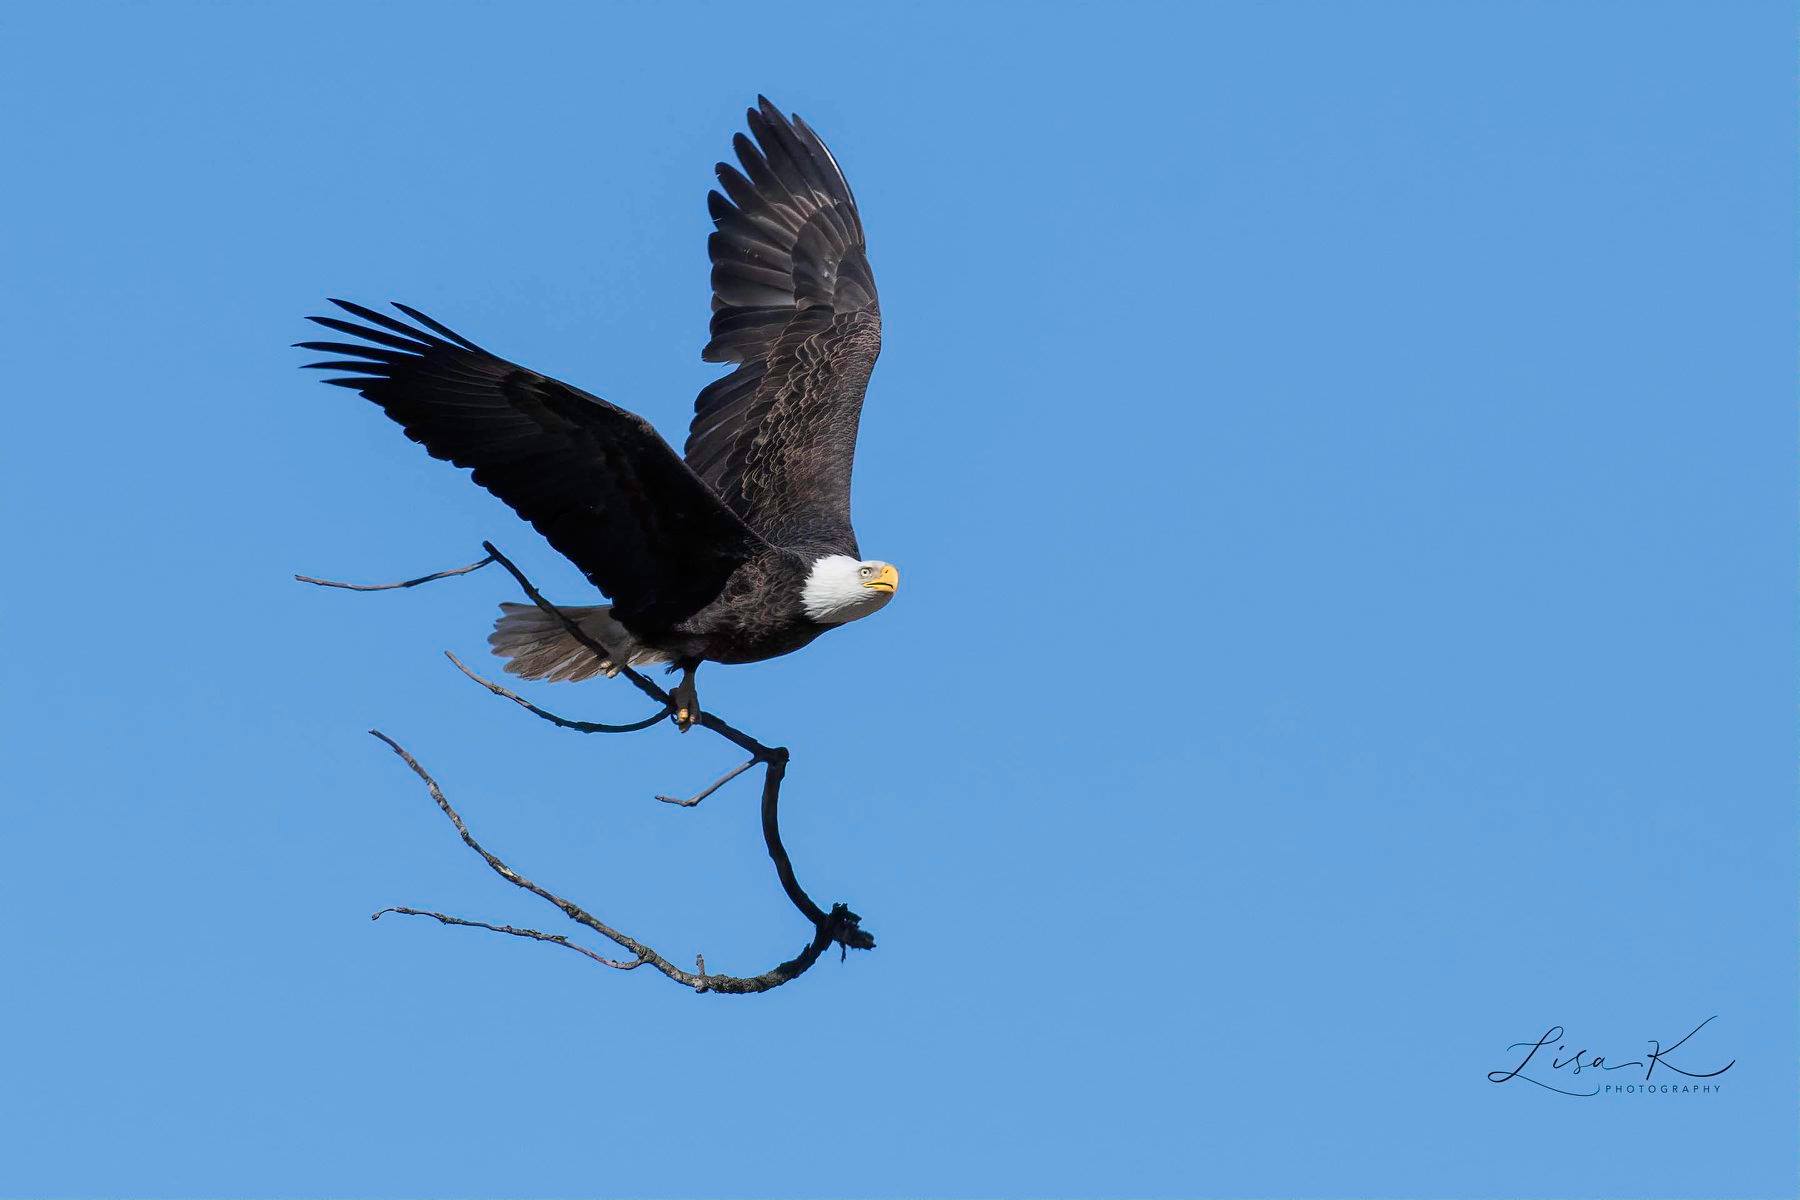 New Jersey Fish & Wildlife - GO EAGLES! 2017 NEW JERSEY BALD EAGLE REPORT!  In 2017, 178 eagle nests were monitored in the nesting season. Of these 153  were active (118 with